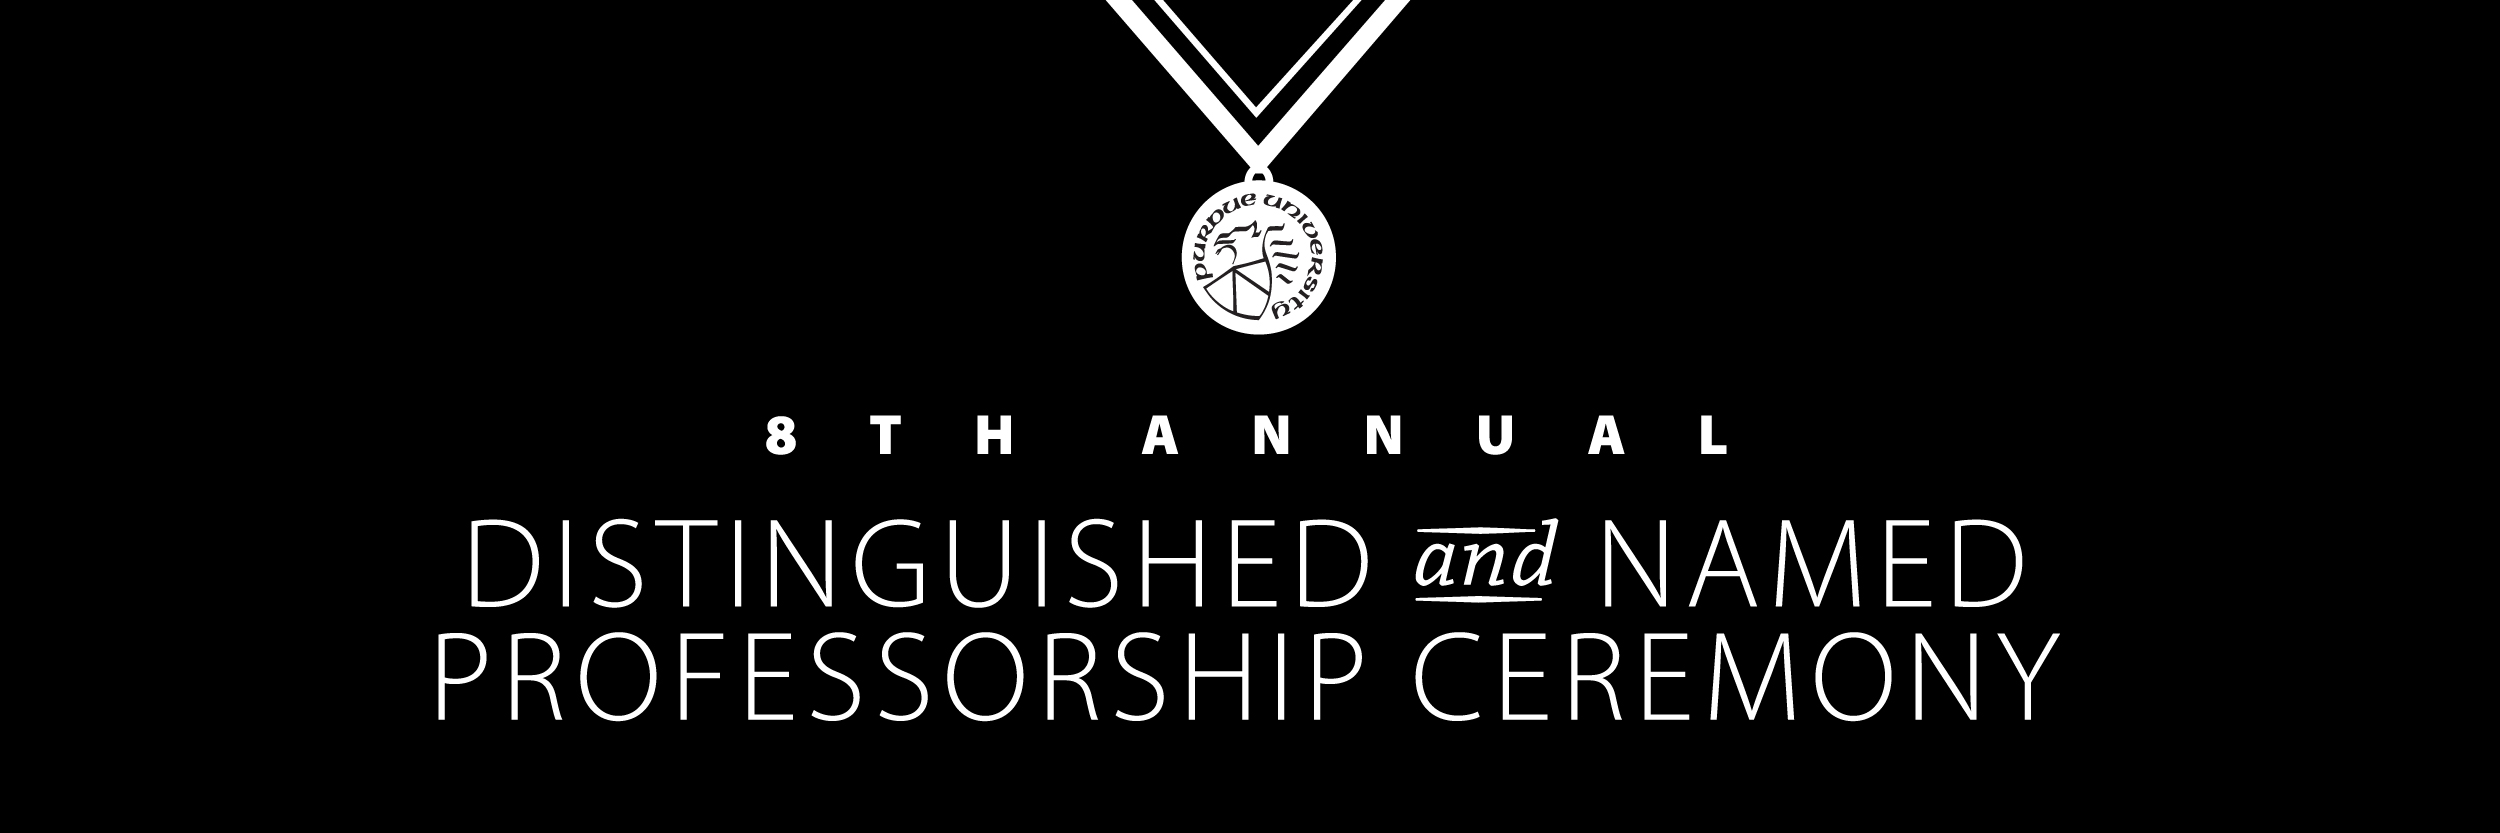 8th Annual Distinguished and Named Professorship Ceremony